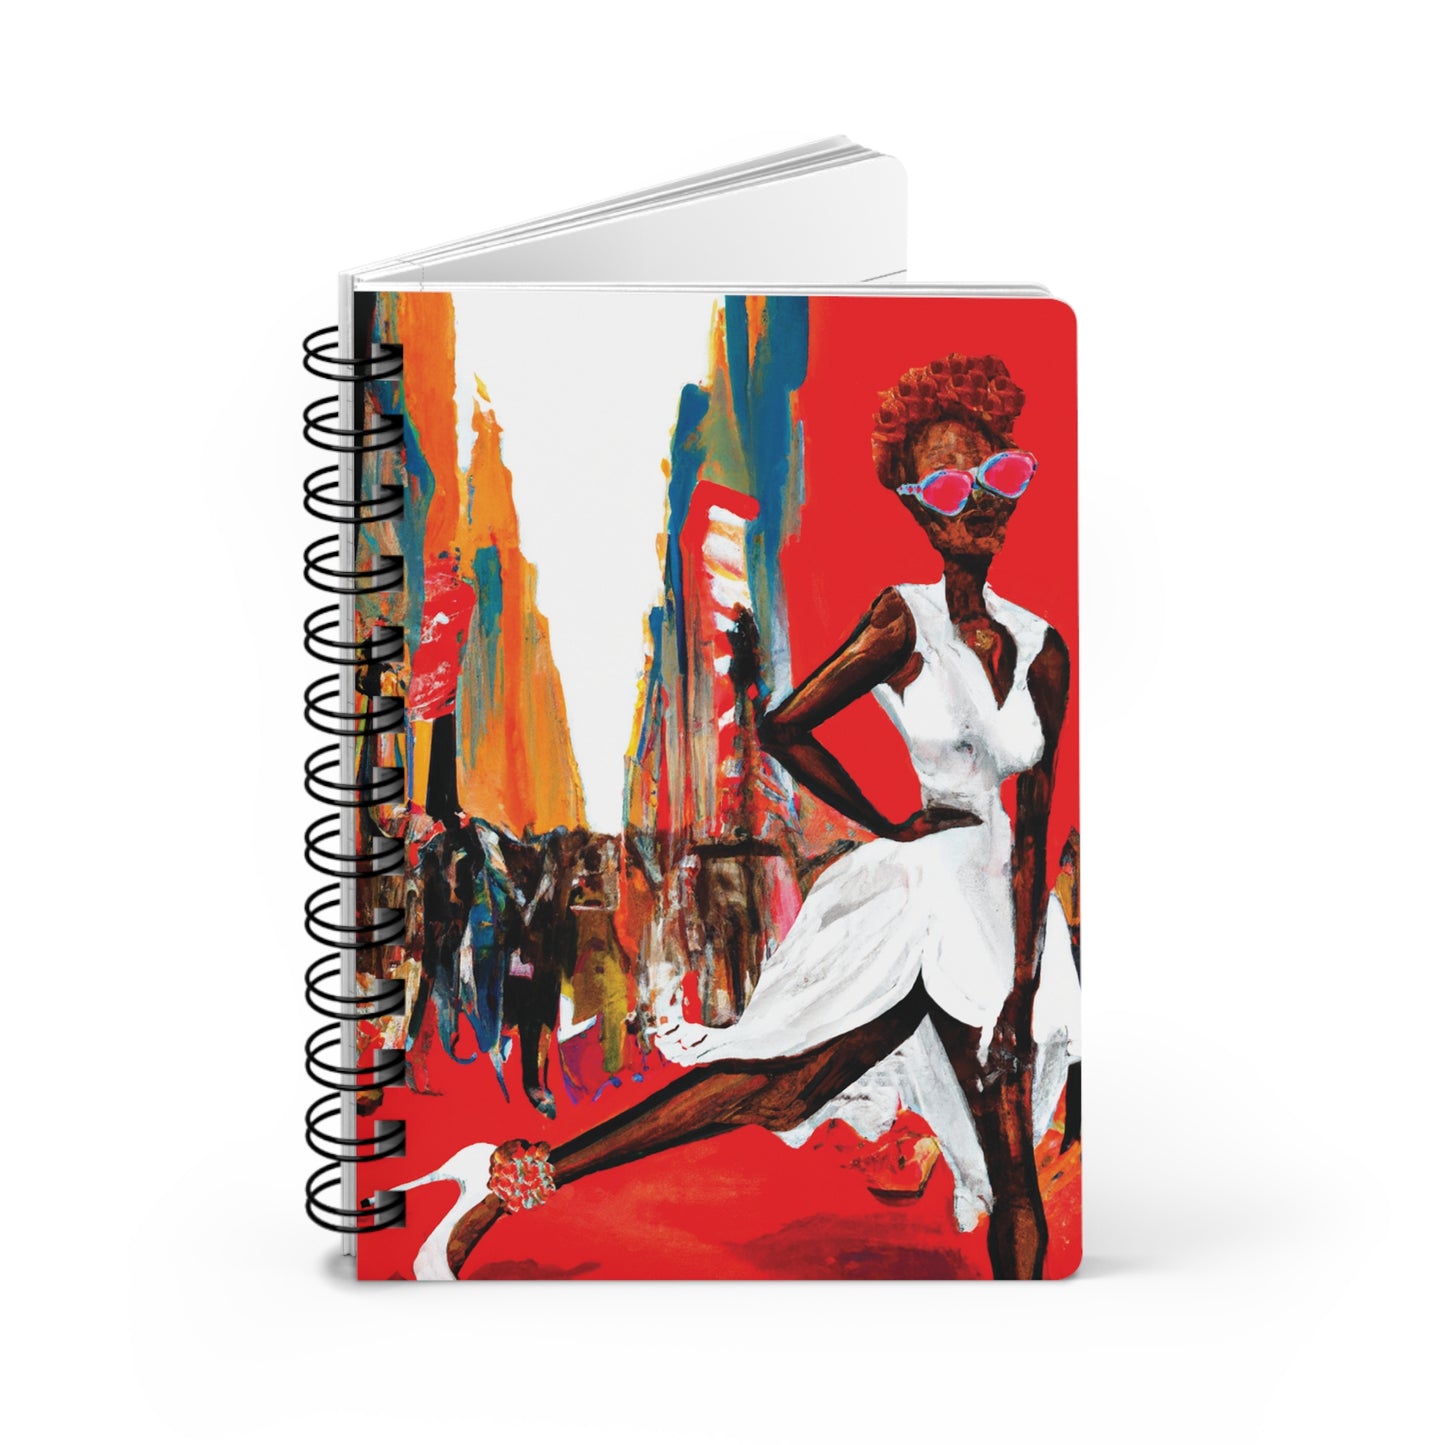 Flossy Karole Spiral Bound Notebooks and Journals with 2023-2024 Year-at-a-Glance Calendar